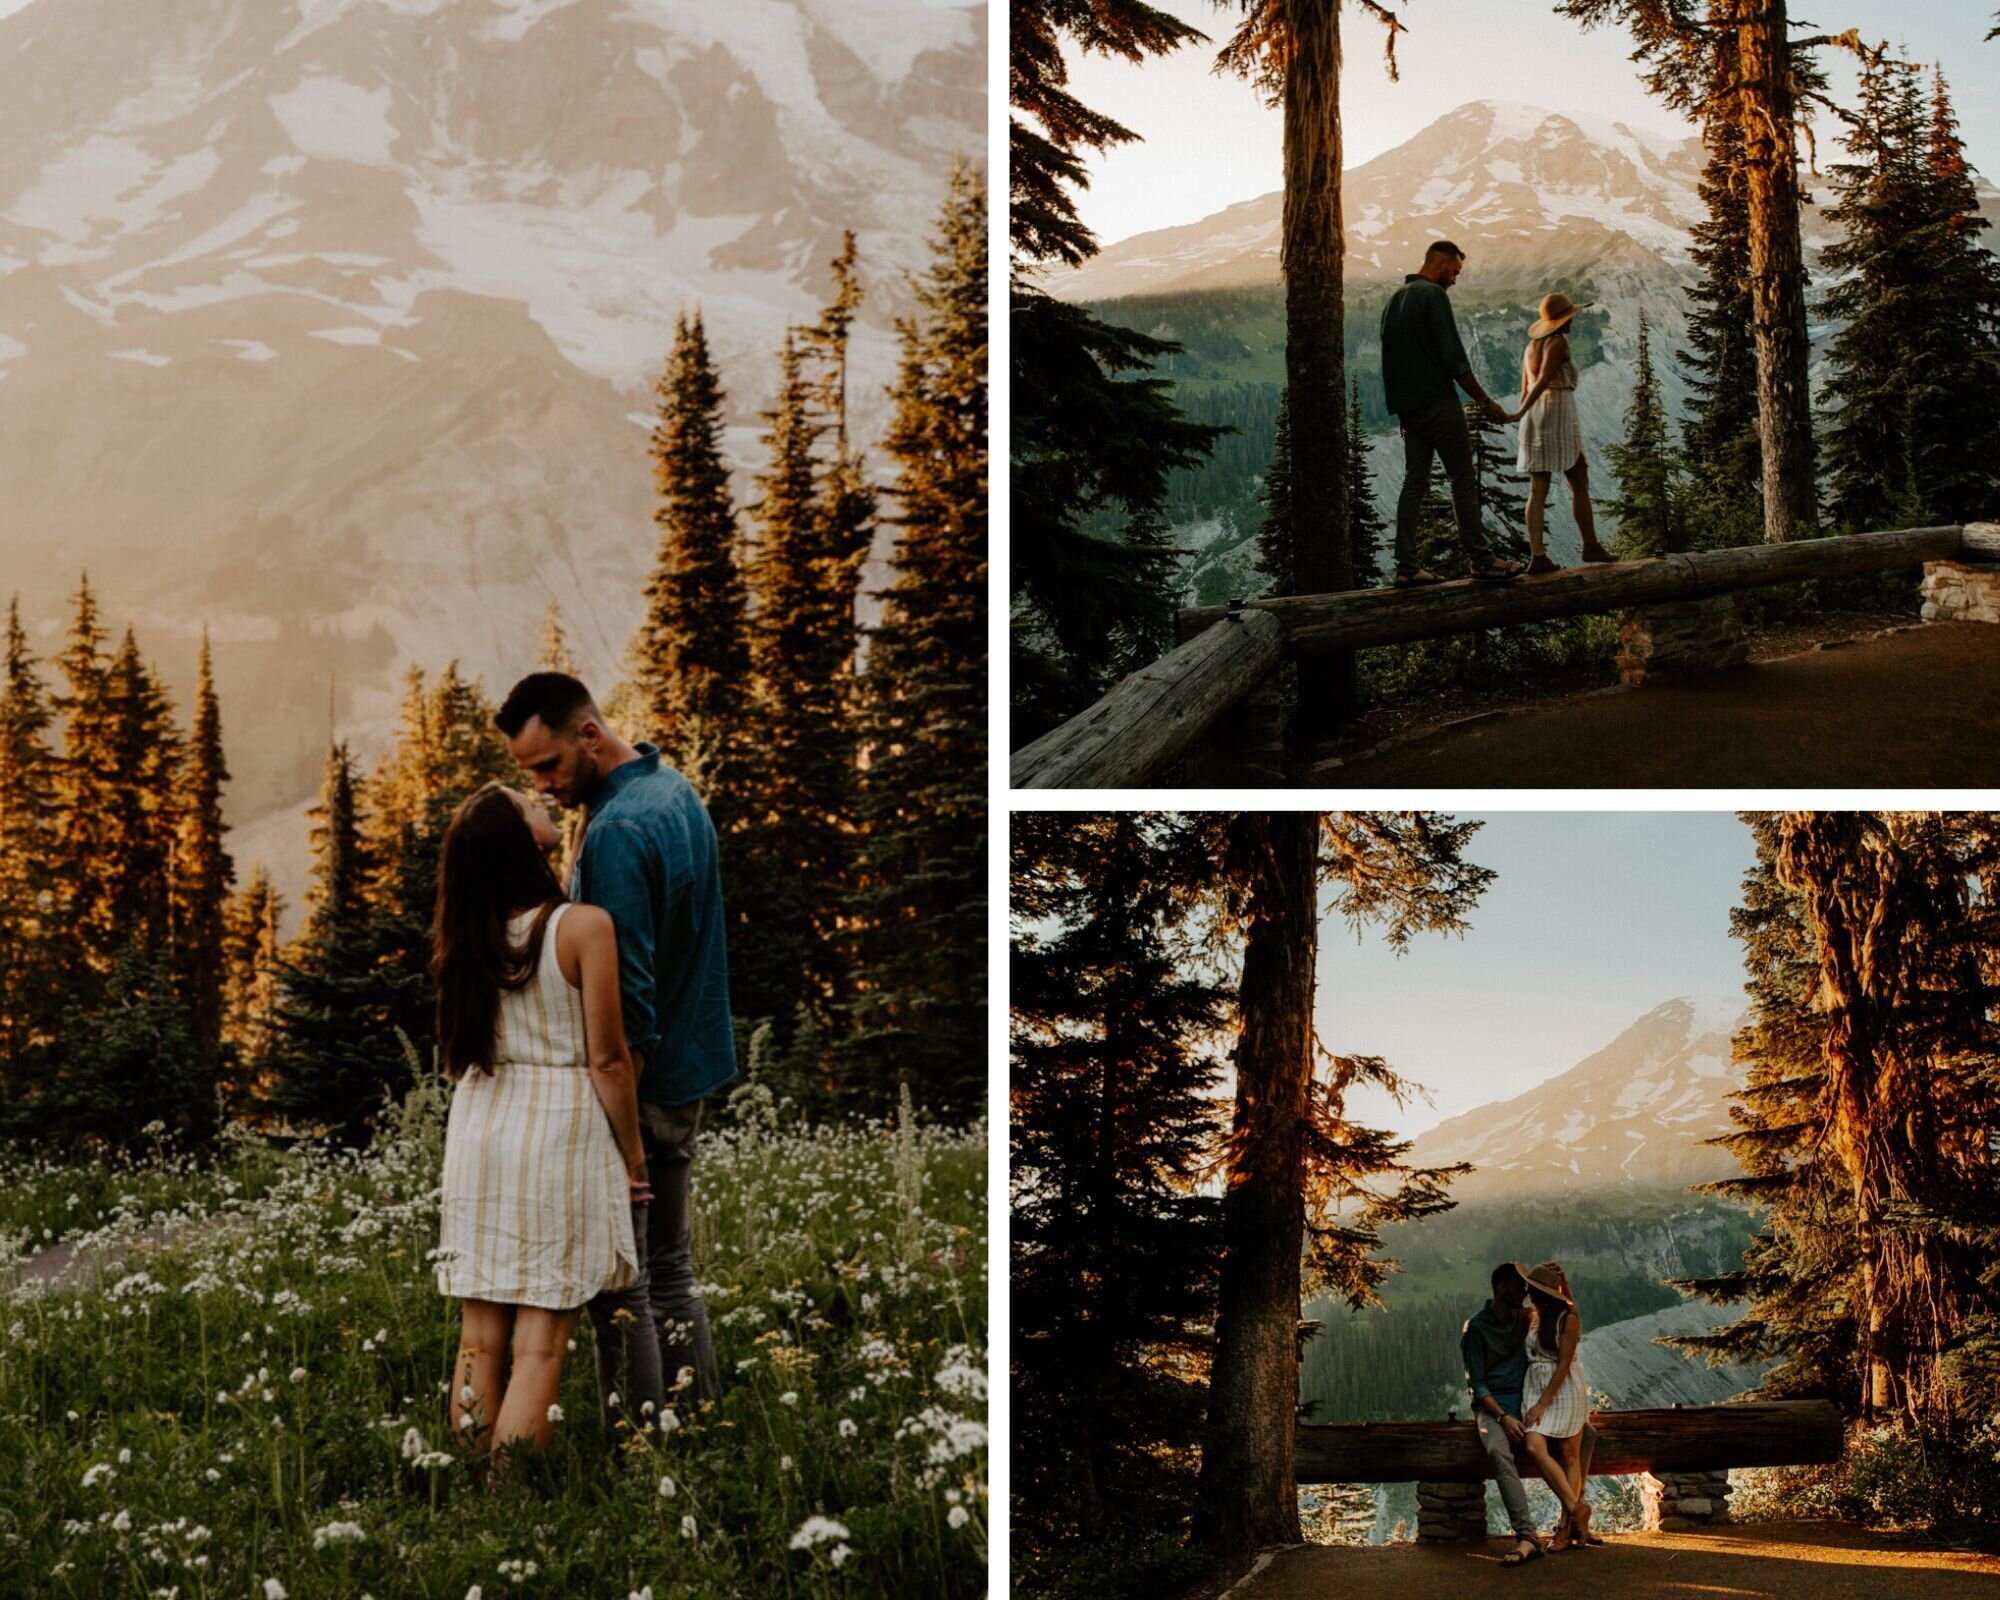 Mount rainier engagement session in the wild flowers at sunset